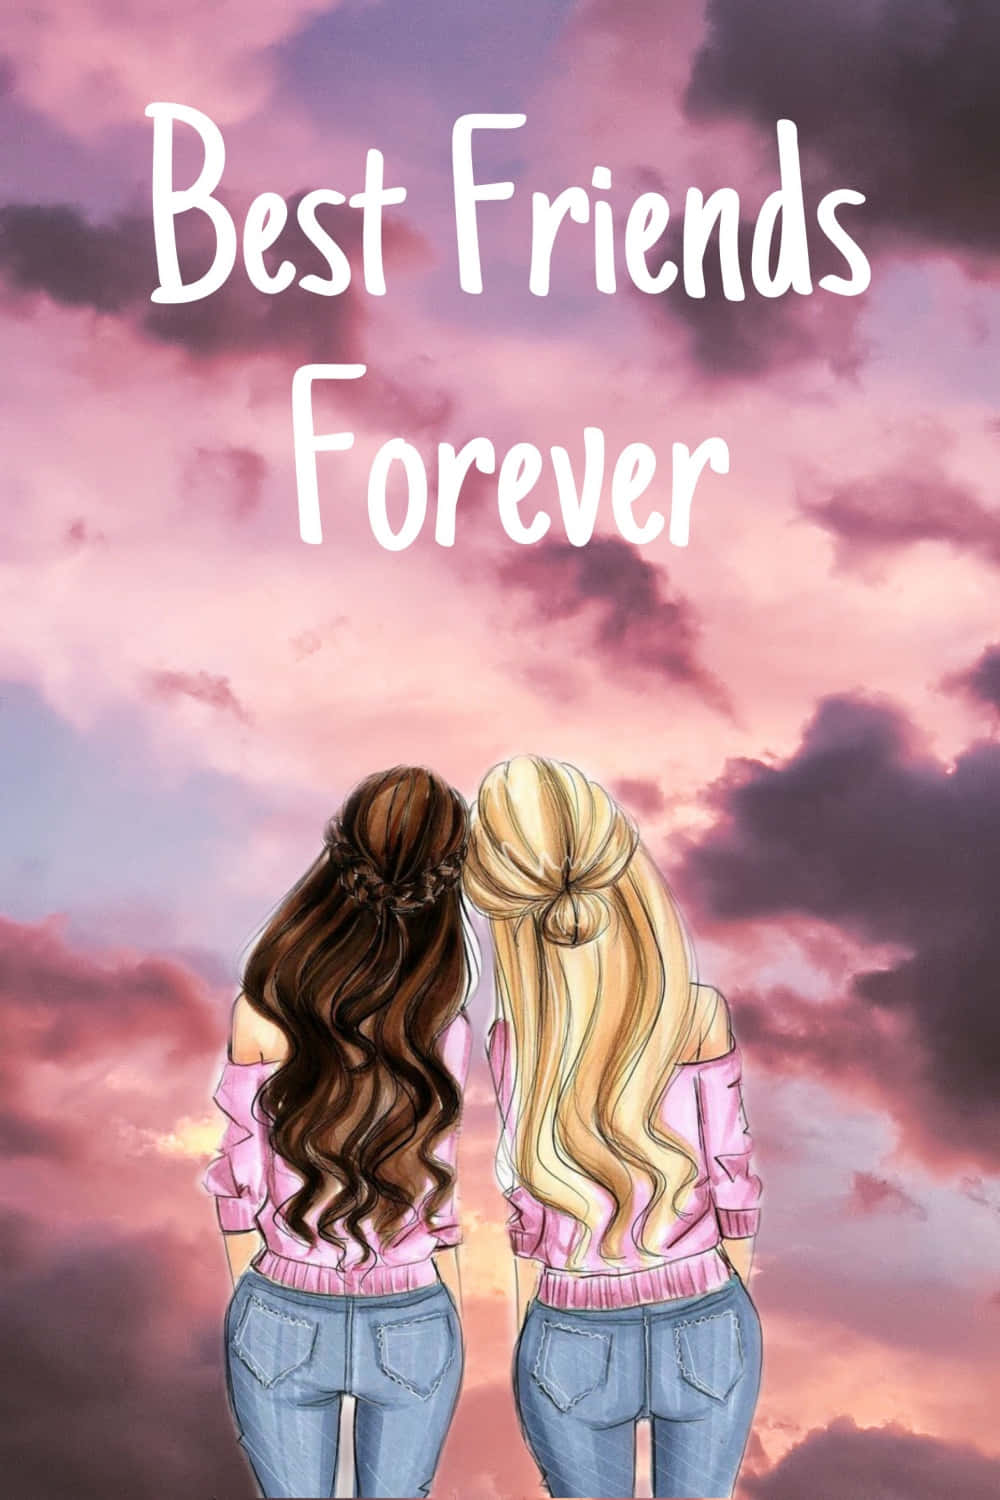 Download Best Friends Forever Cute Bff Picture | Wallpapers.com